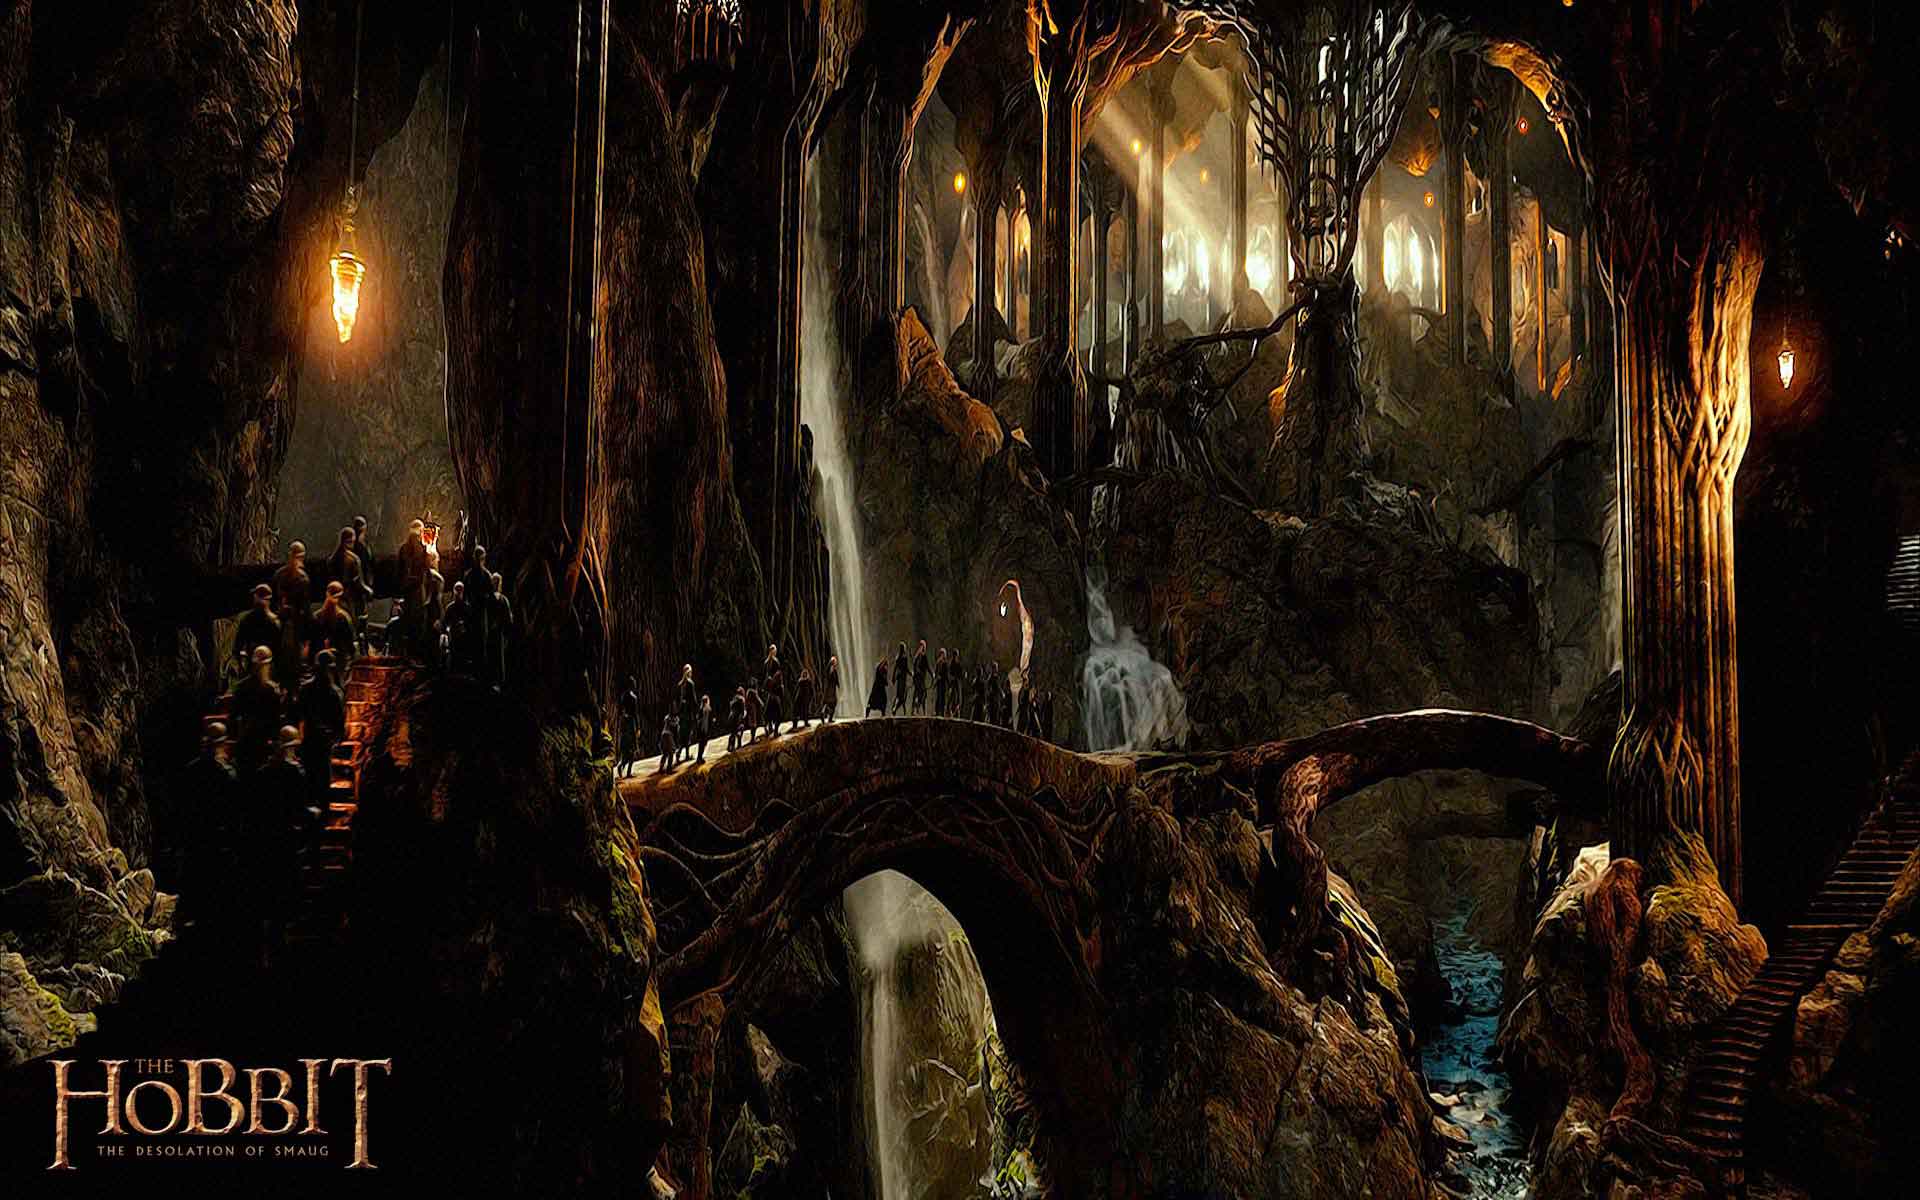 The hobbit desolation of smaug wallpapers hd backgrounds1 Hobbit